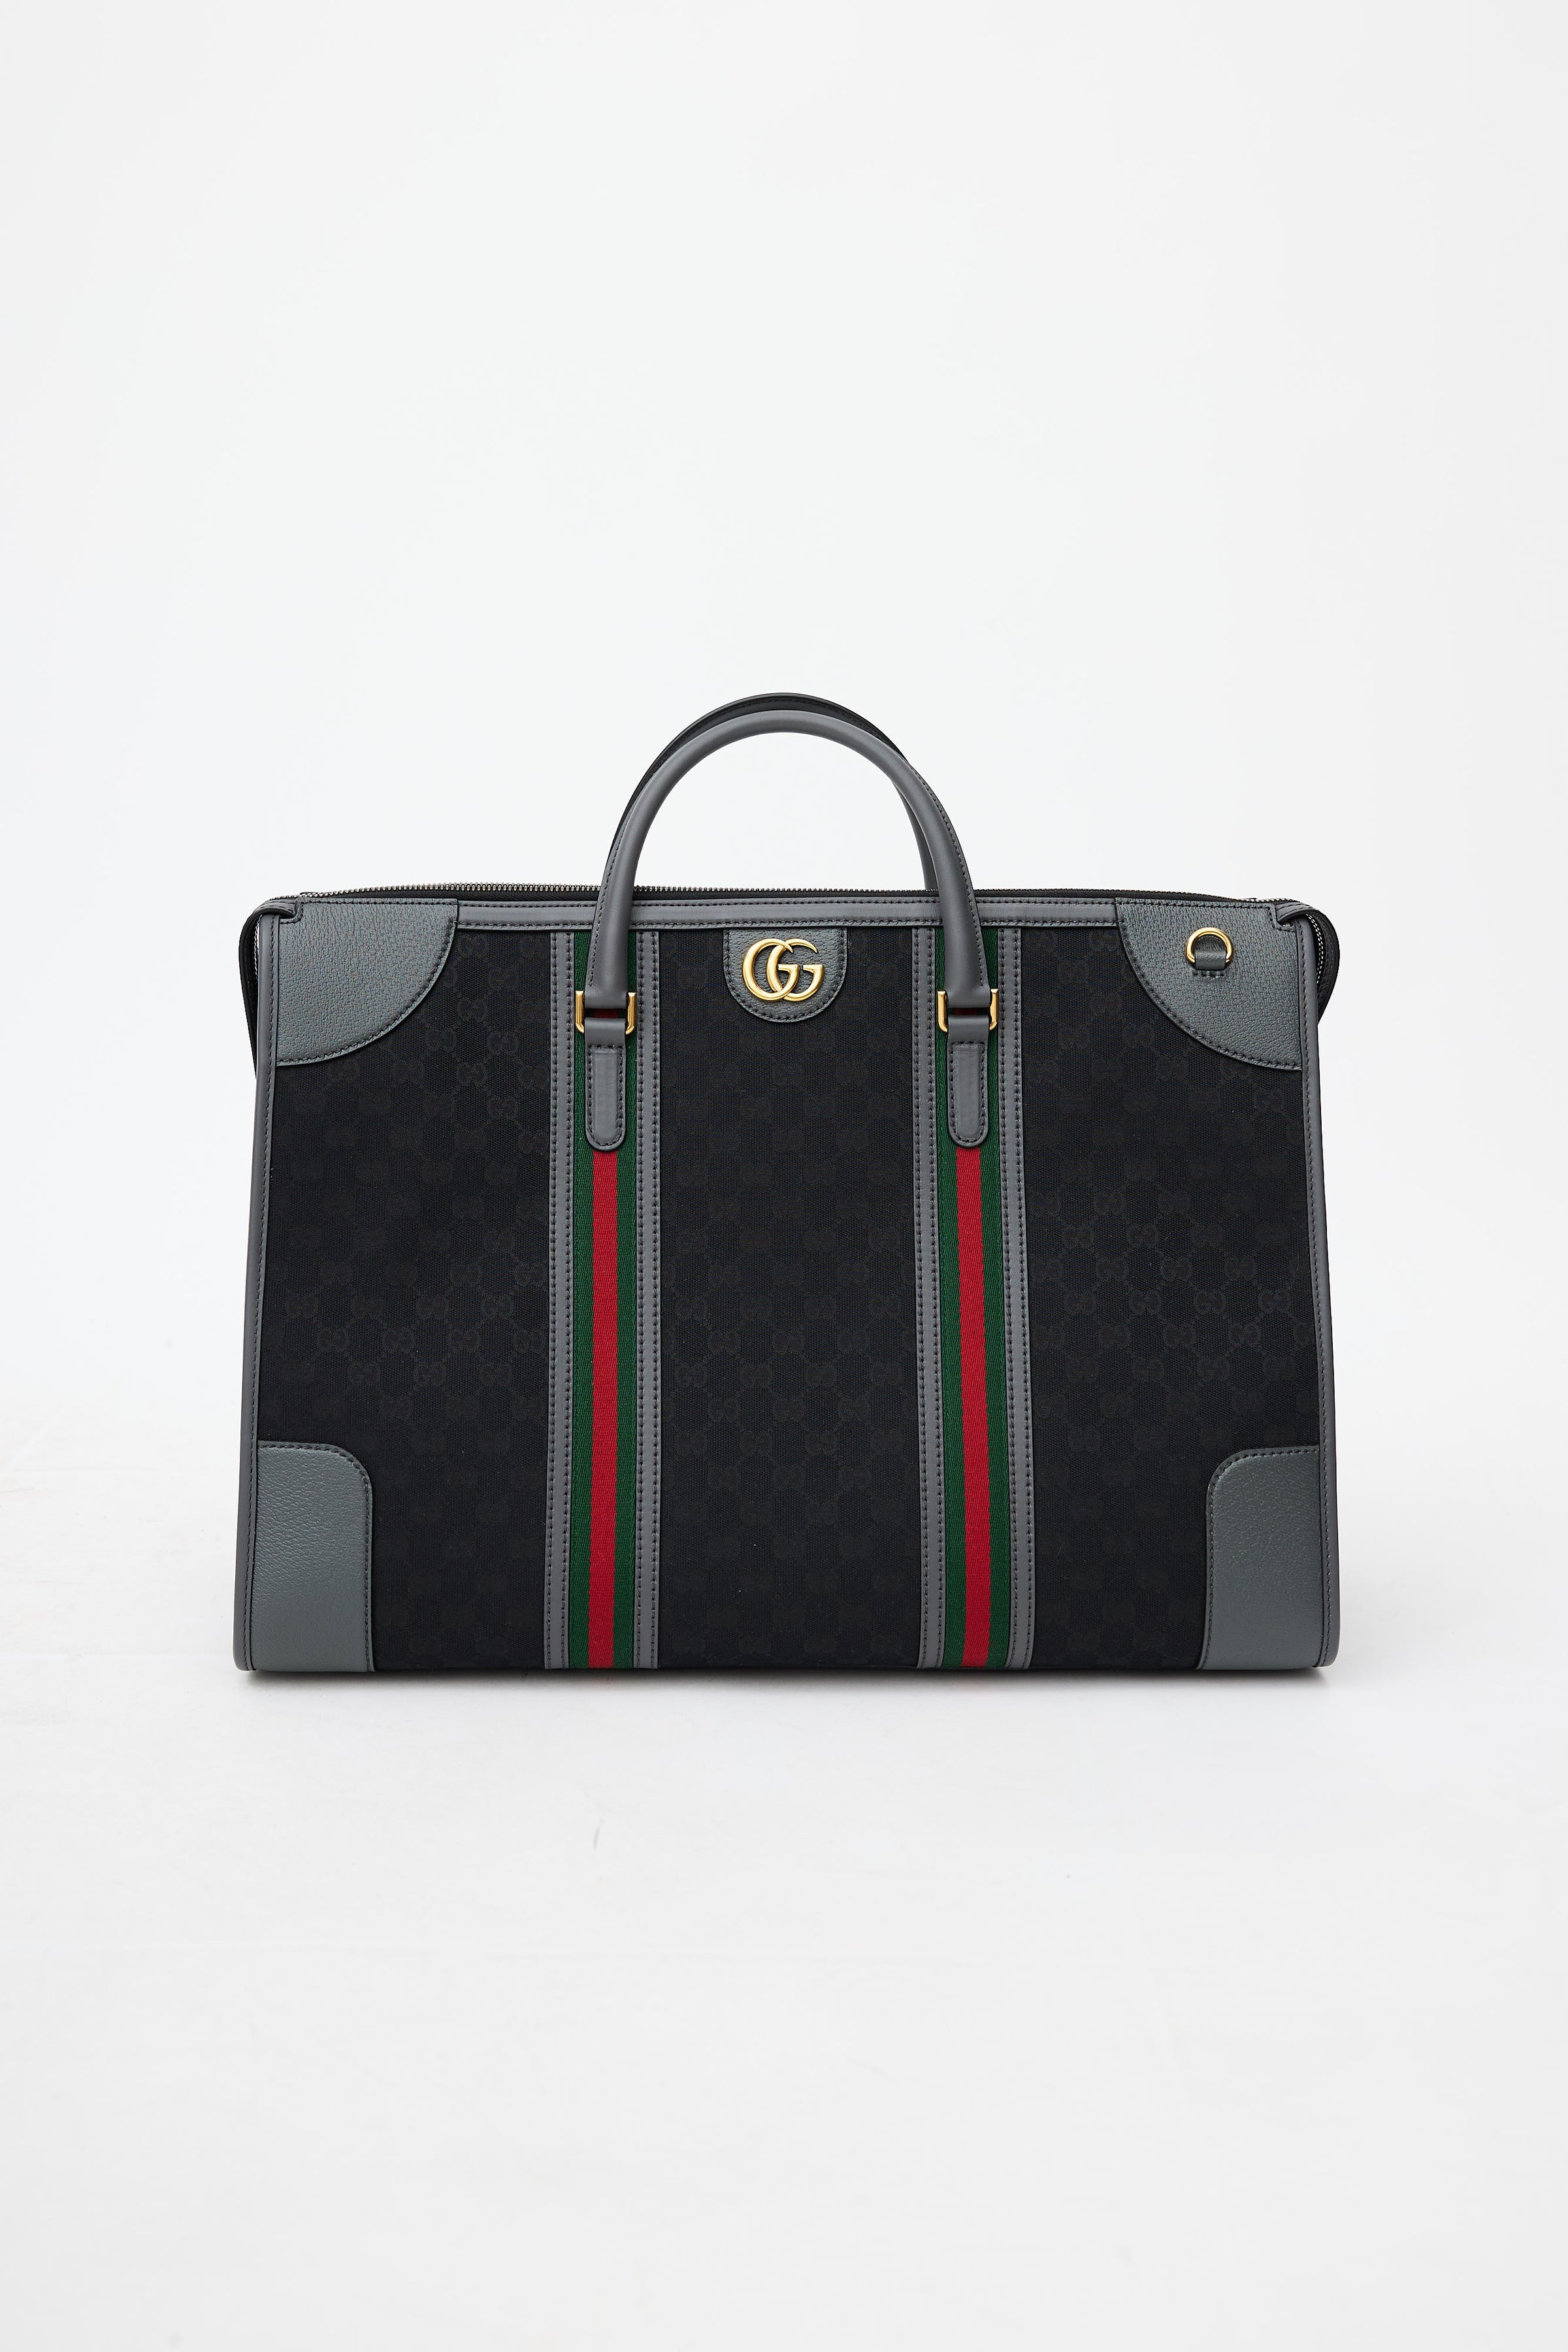 Ophidia small duffle bag in grey and black Supreme | GUCCI® US